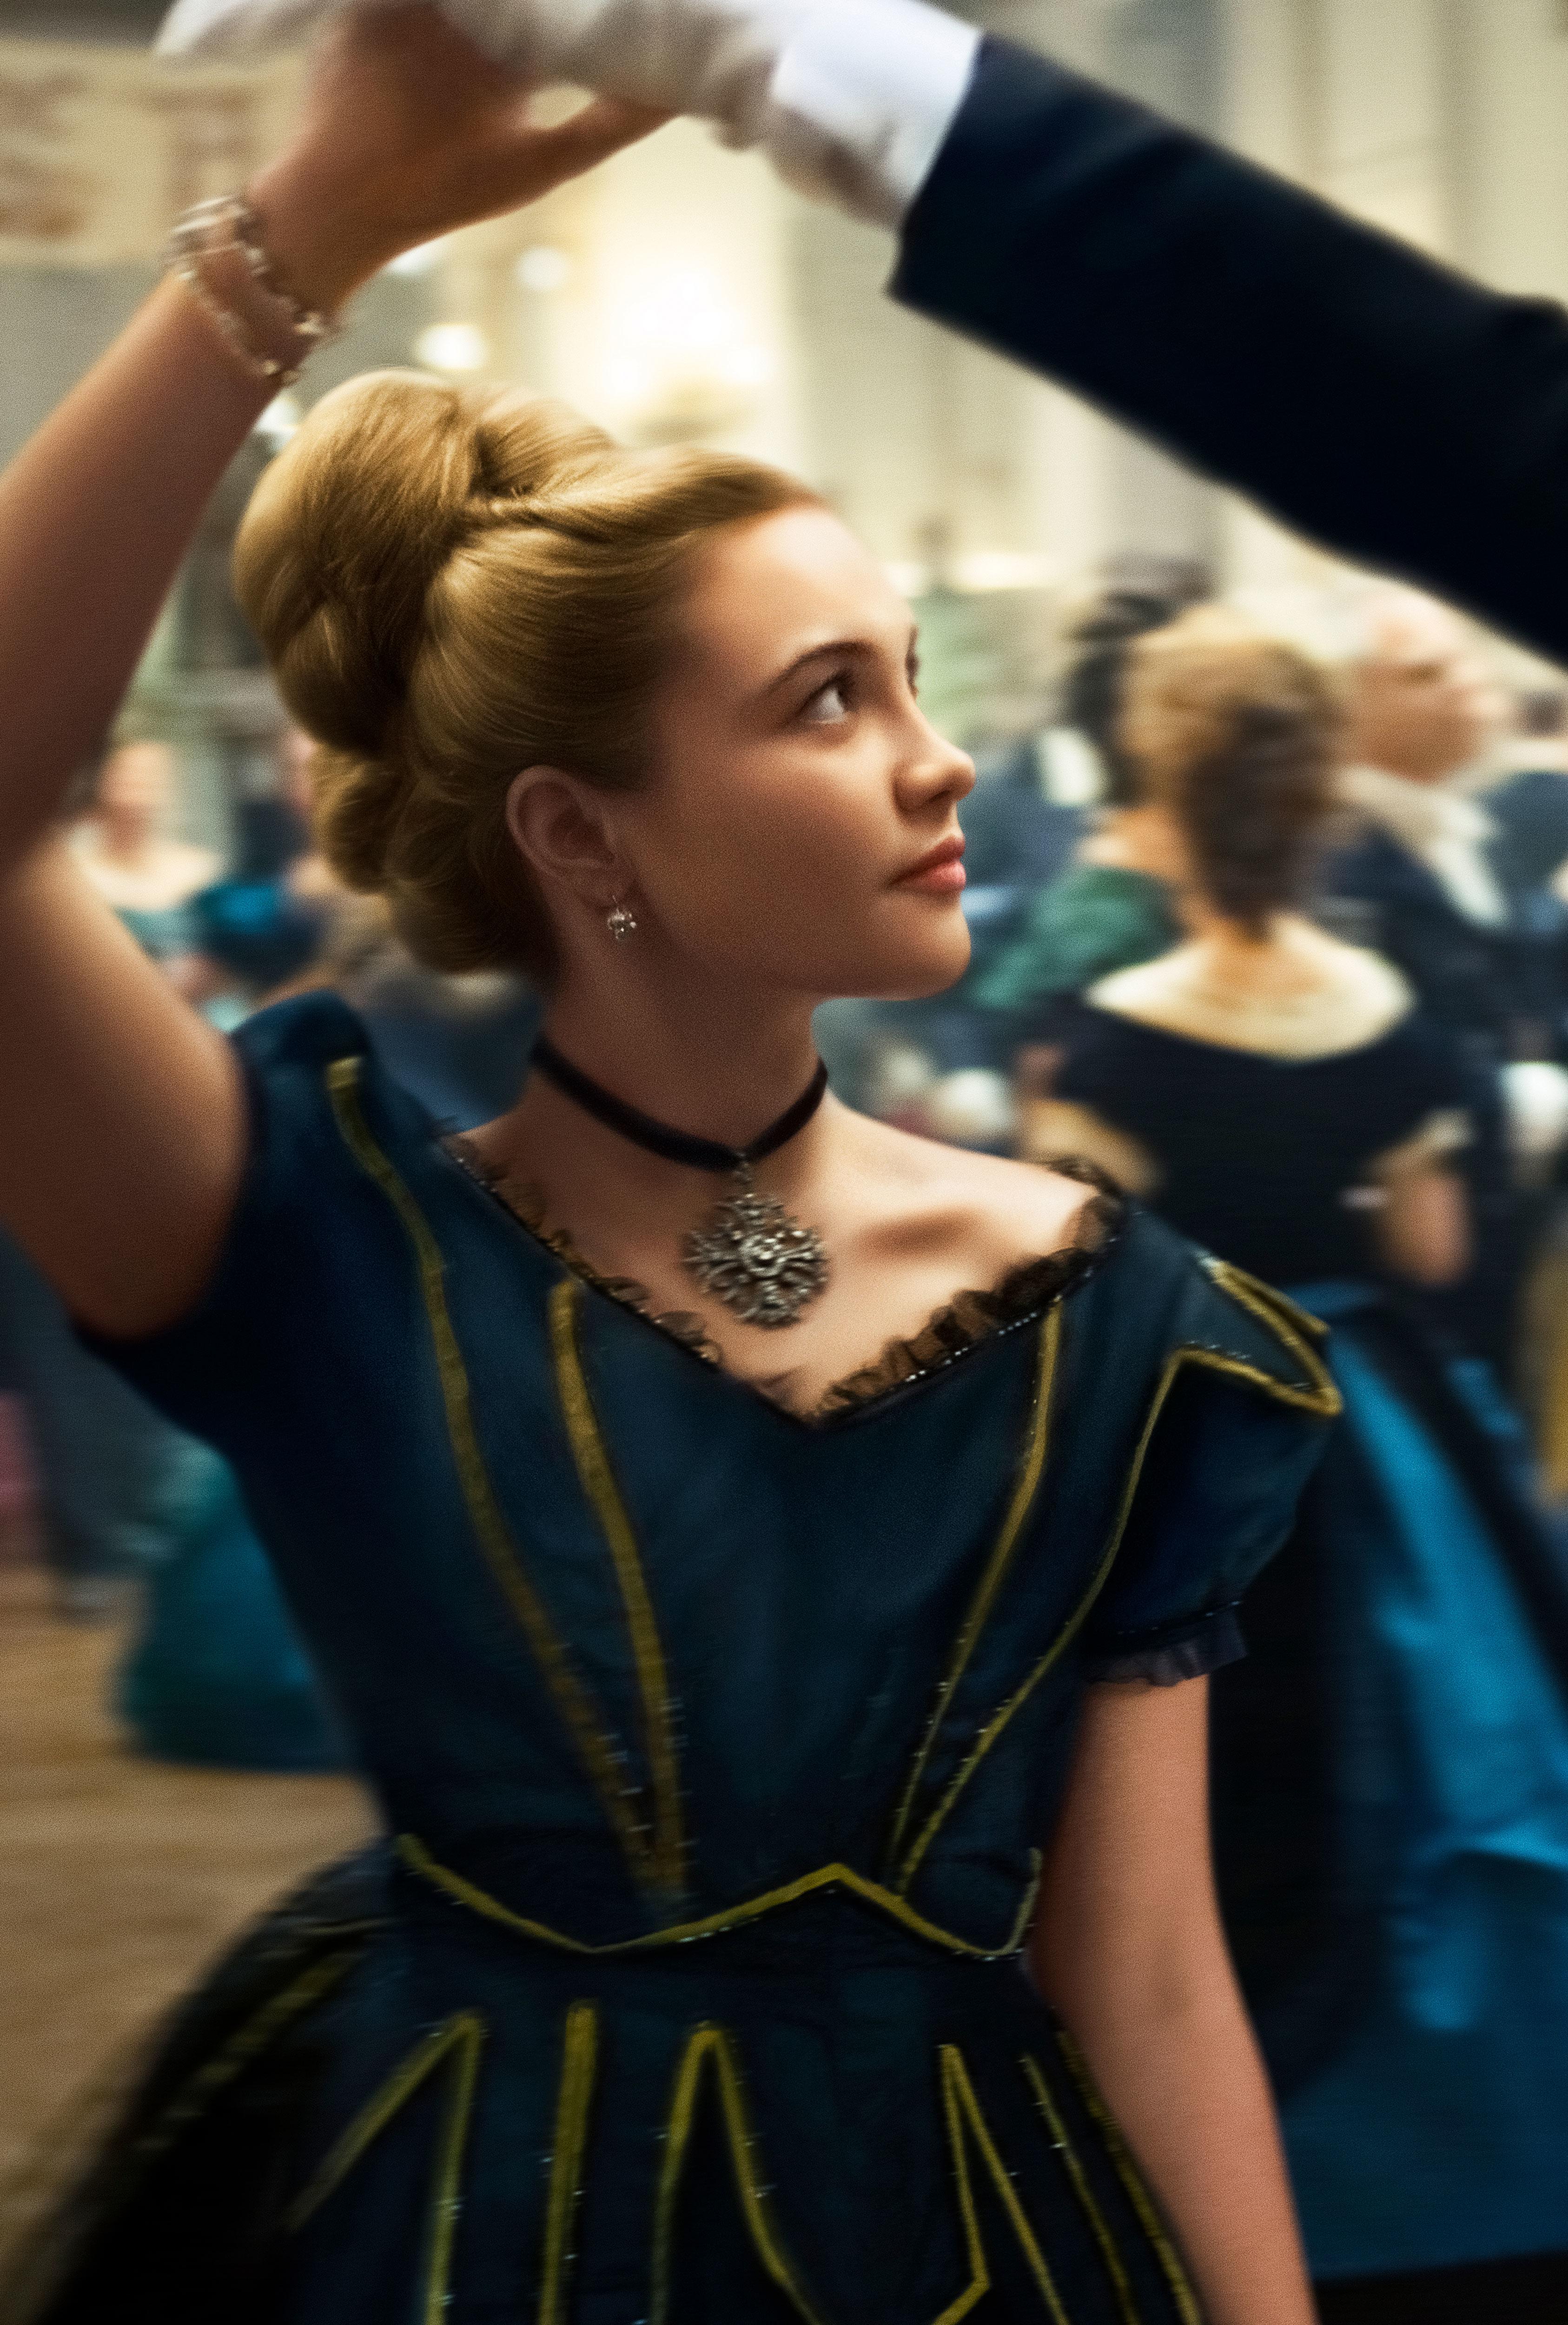 Florence Pugh In Little Women Wallpaper, HD Movies 4K Wallpaper, Image, Photo and Background